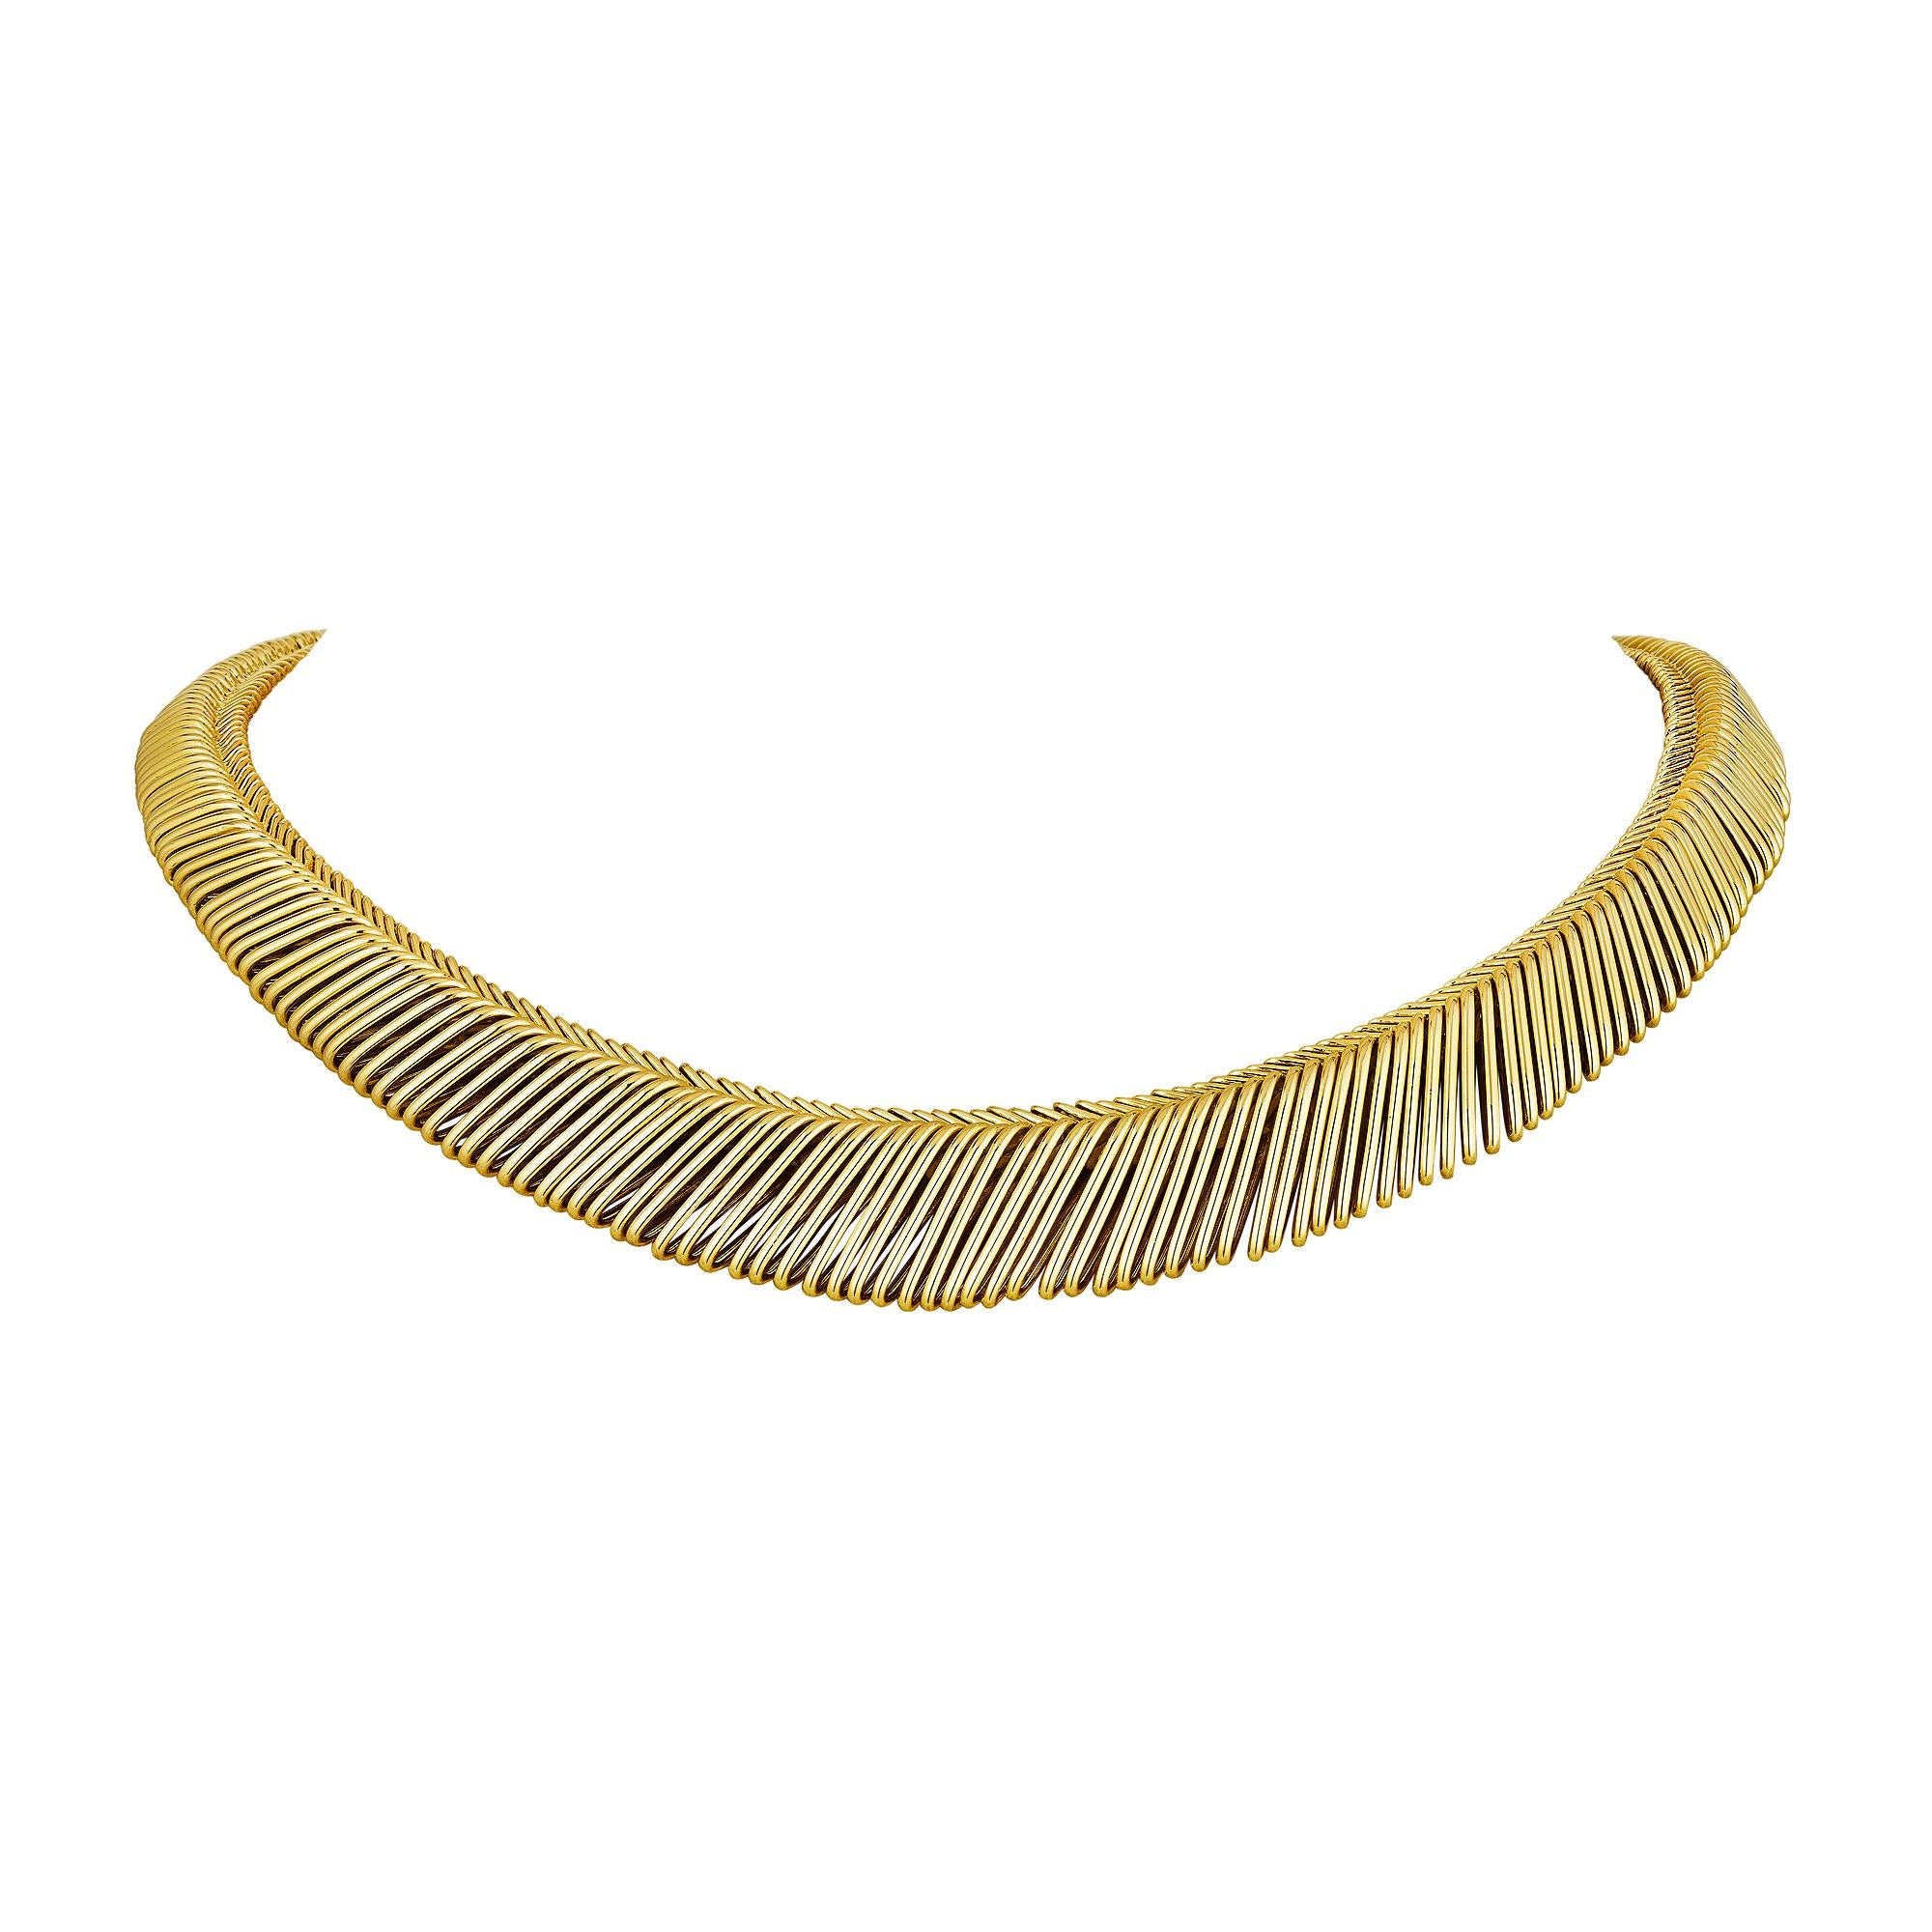 Visually replicating a soft and supple couture fabric fringe, this Van Cleef & Arpels George L'Enfant mid-century gold angel hair collar is an incredibly stylish everyday wardrobe accessory.  It's comfortable and flexible fringe of gold threads